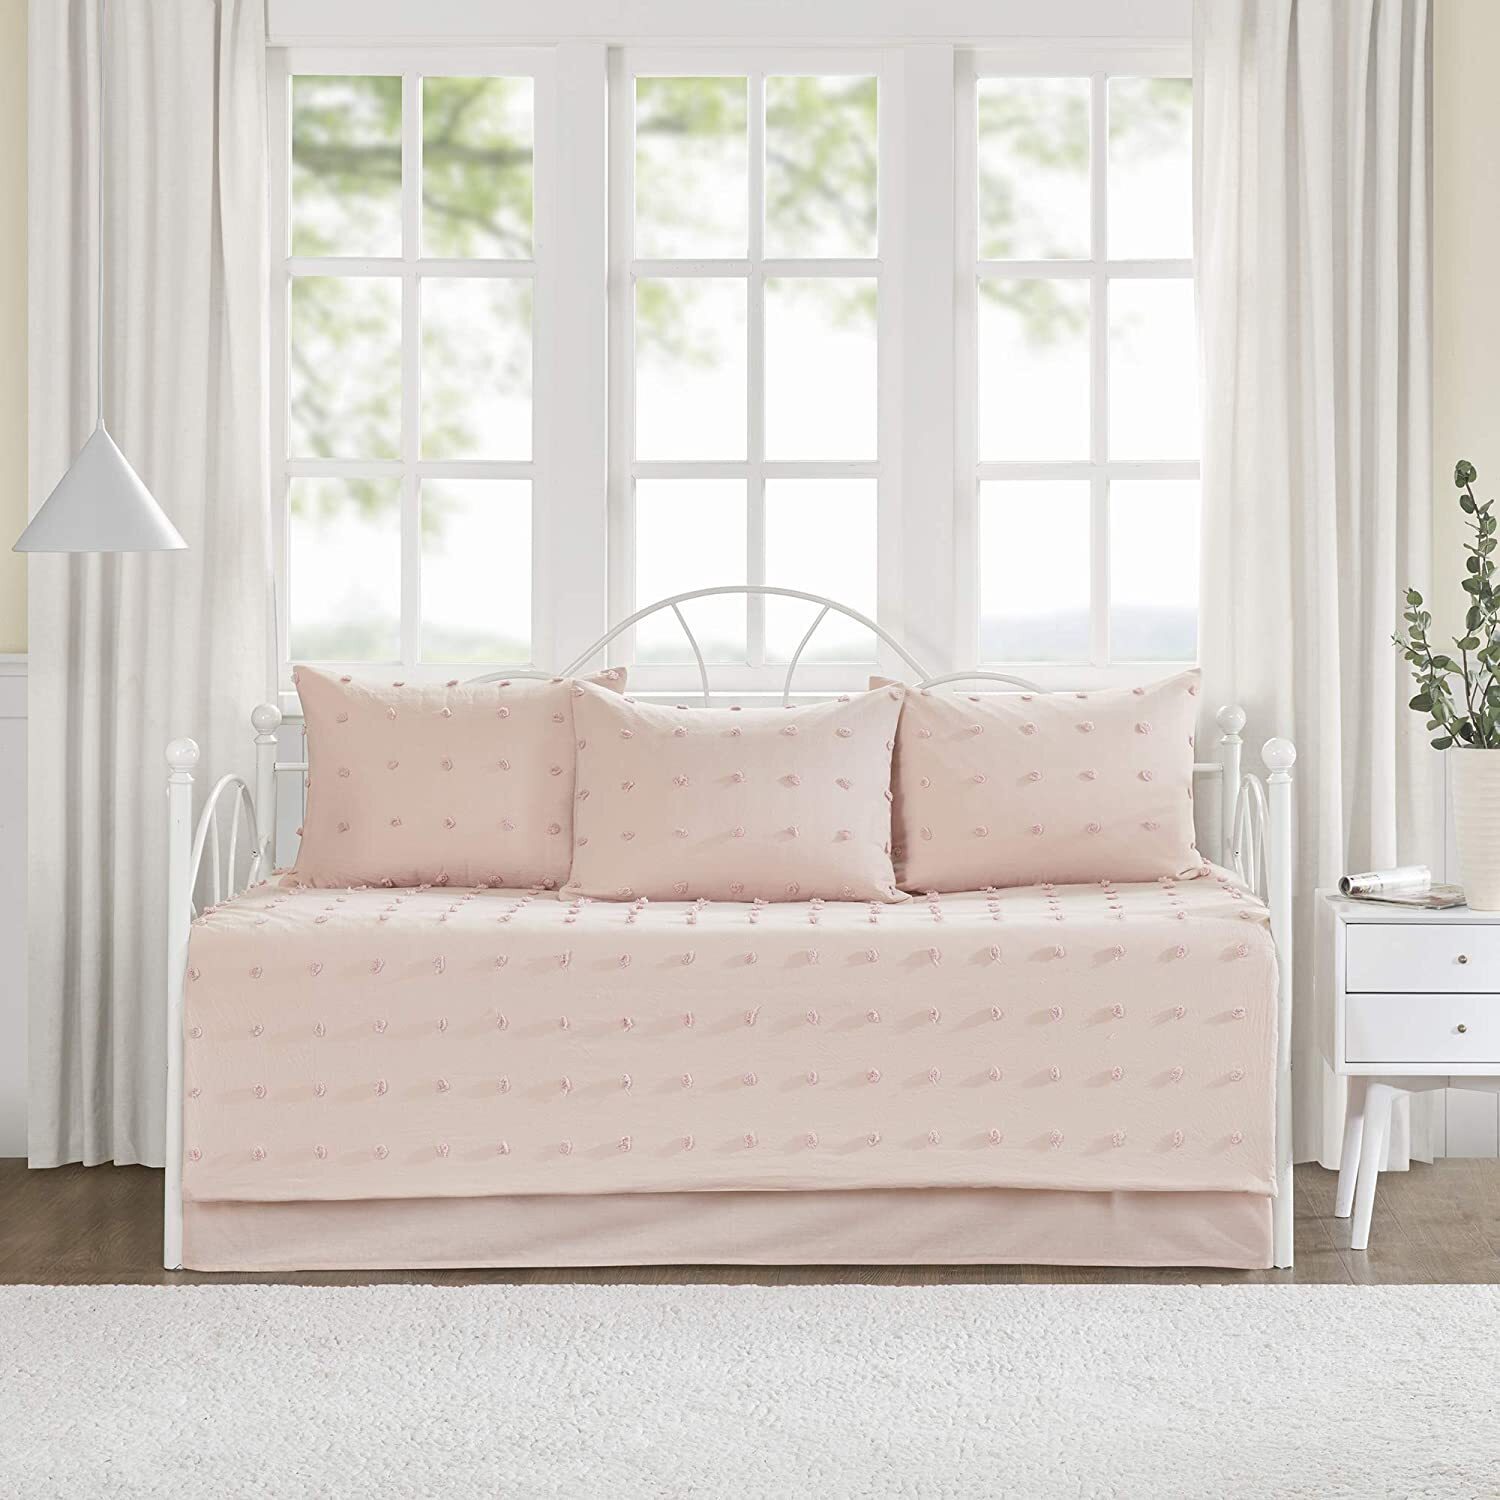 Dusky Pink Quilted Reverse Bedding 